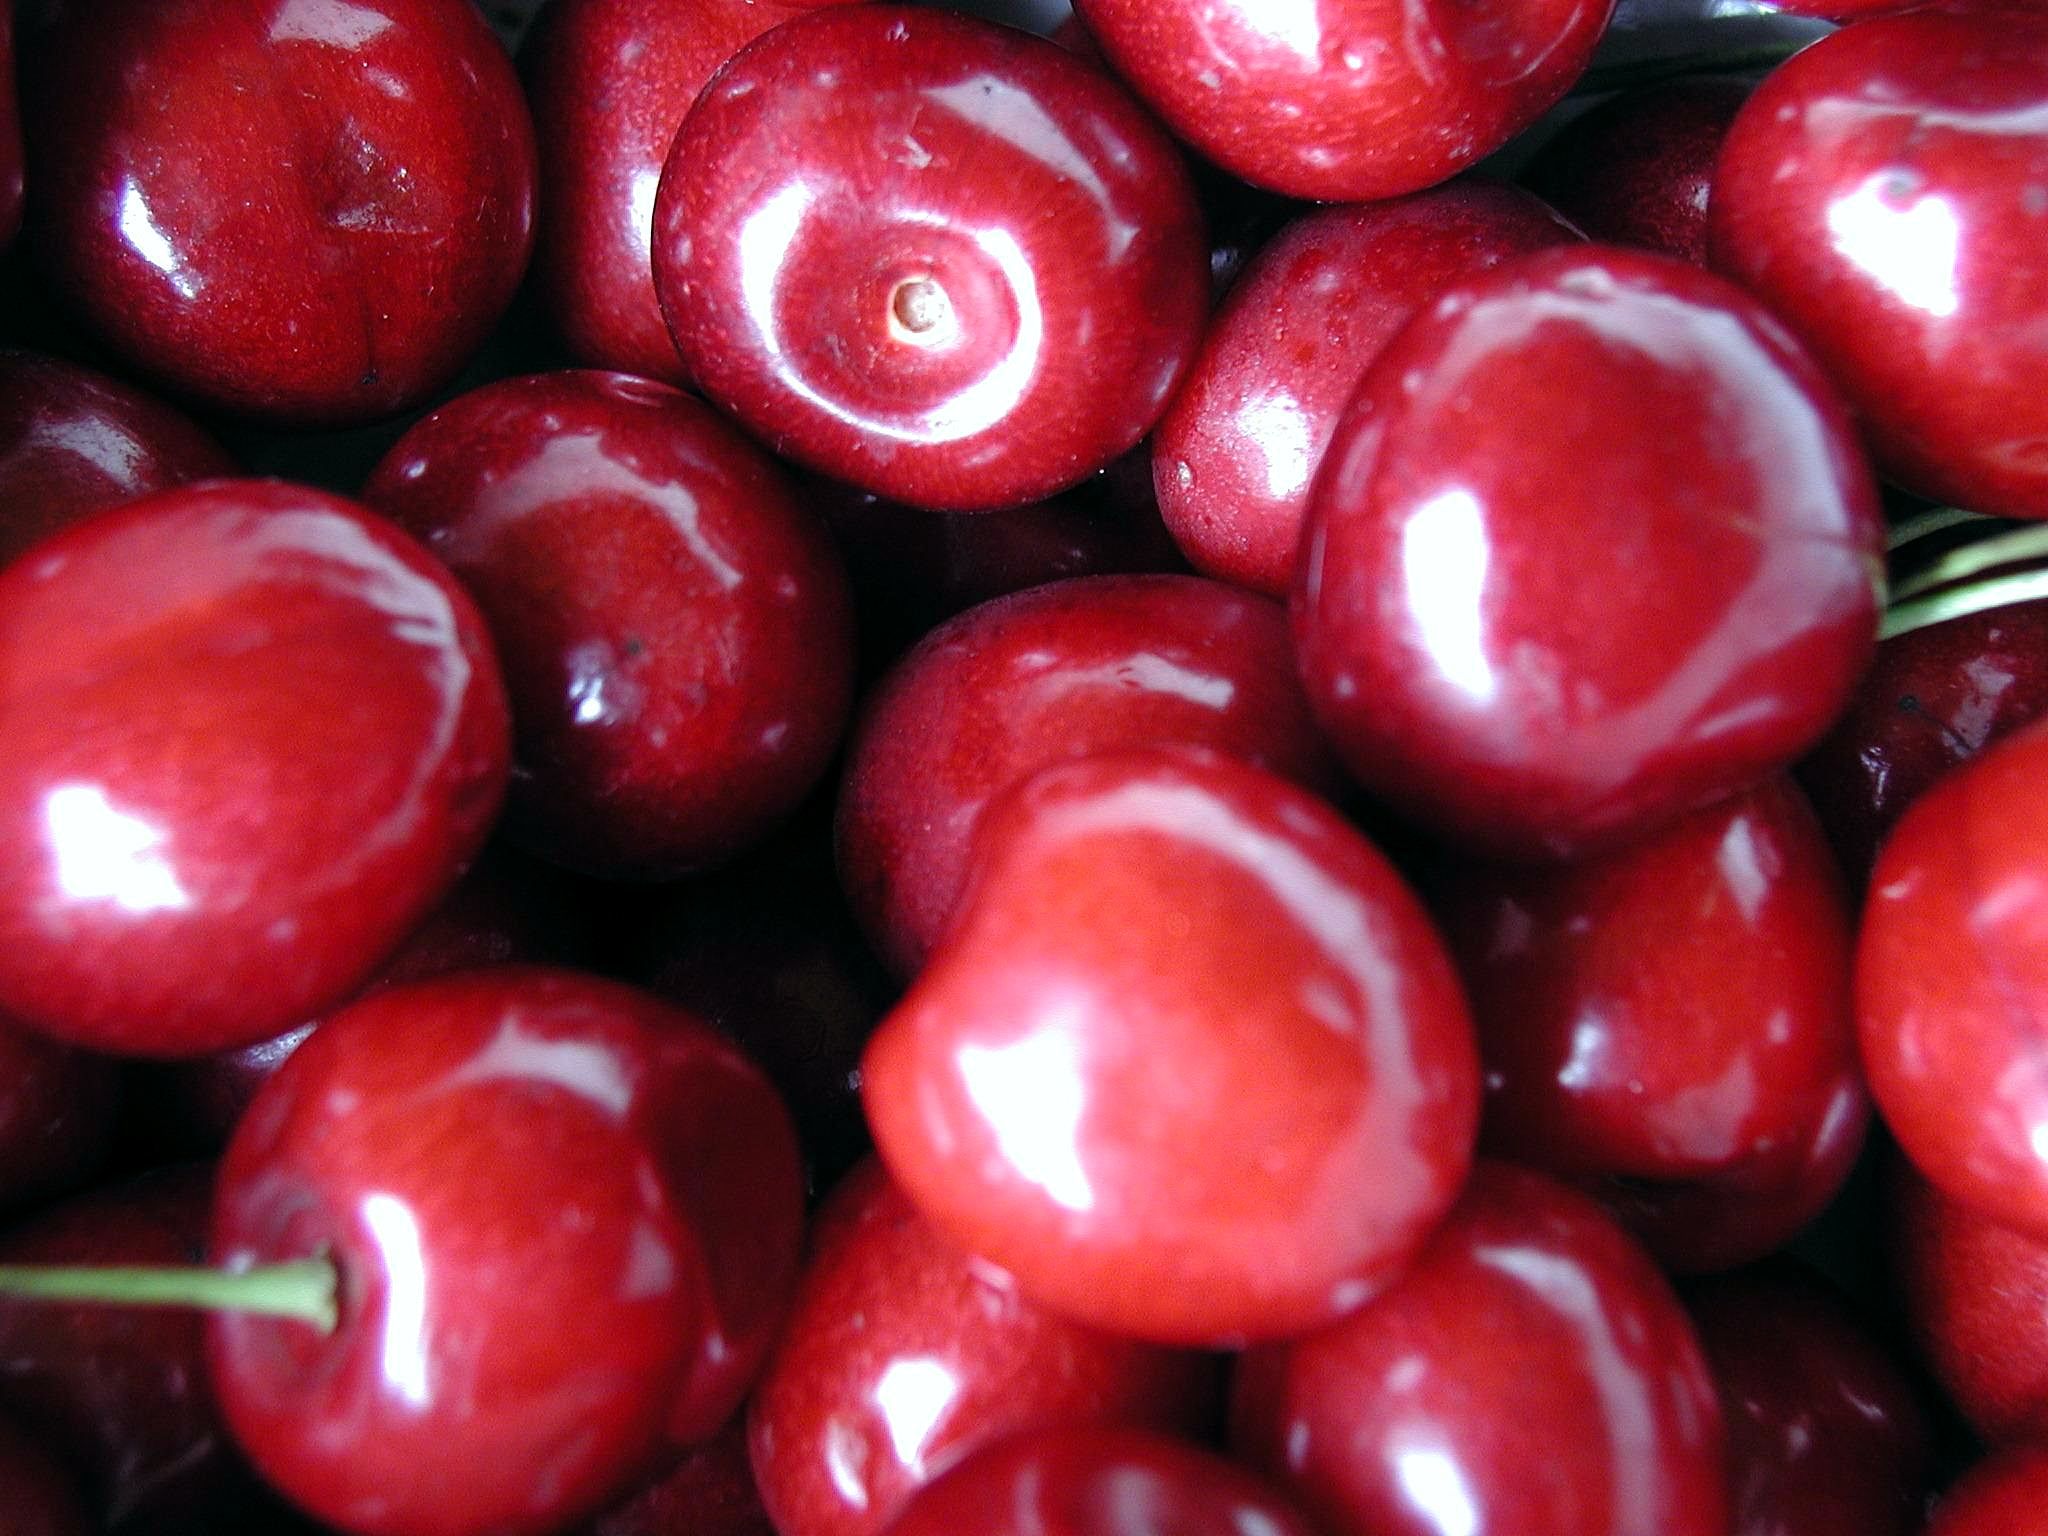 File:Cherry red fruits.jpg - Wikimedia Commons